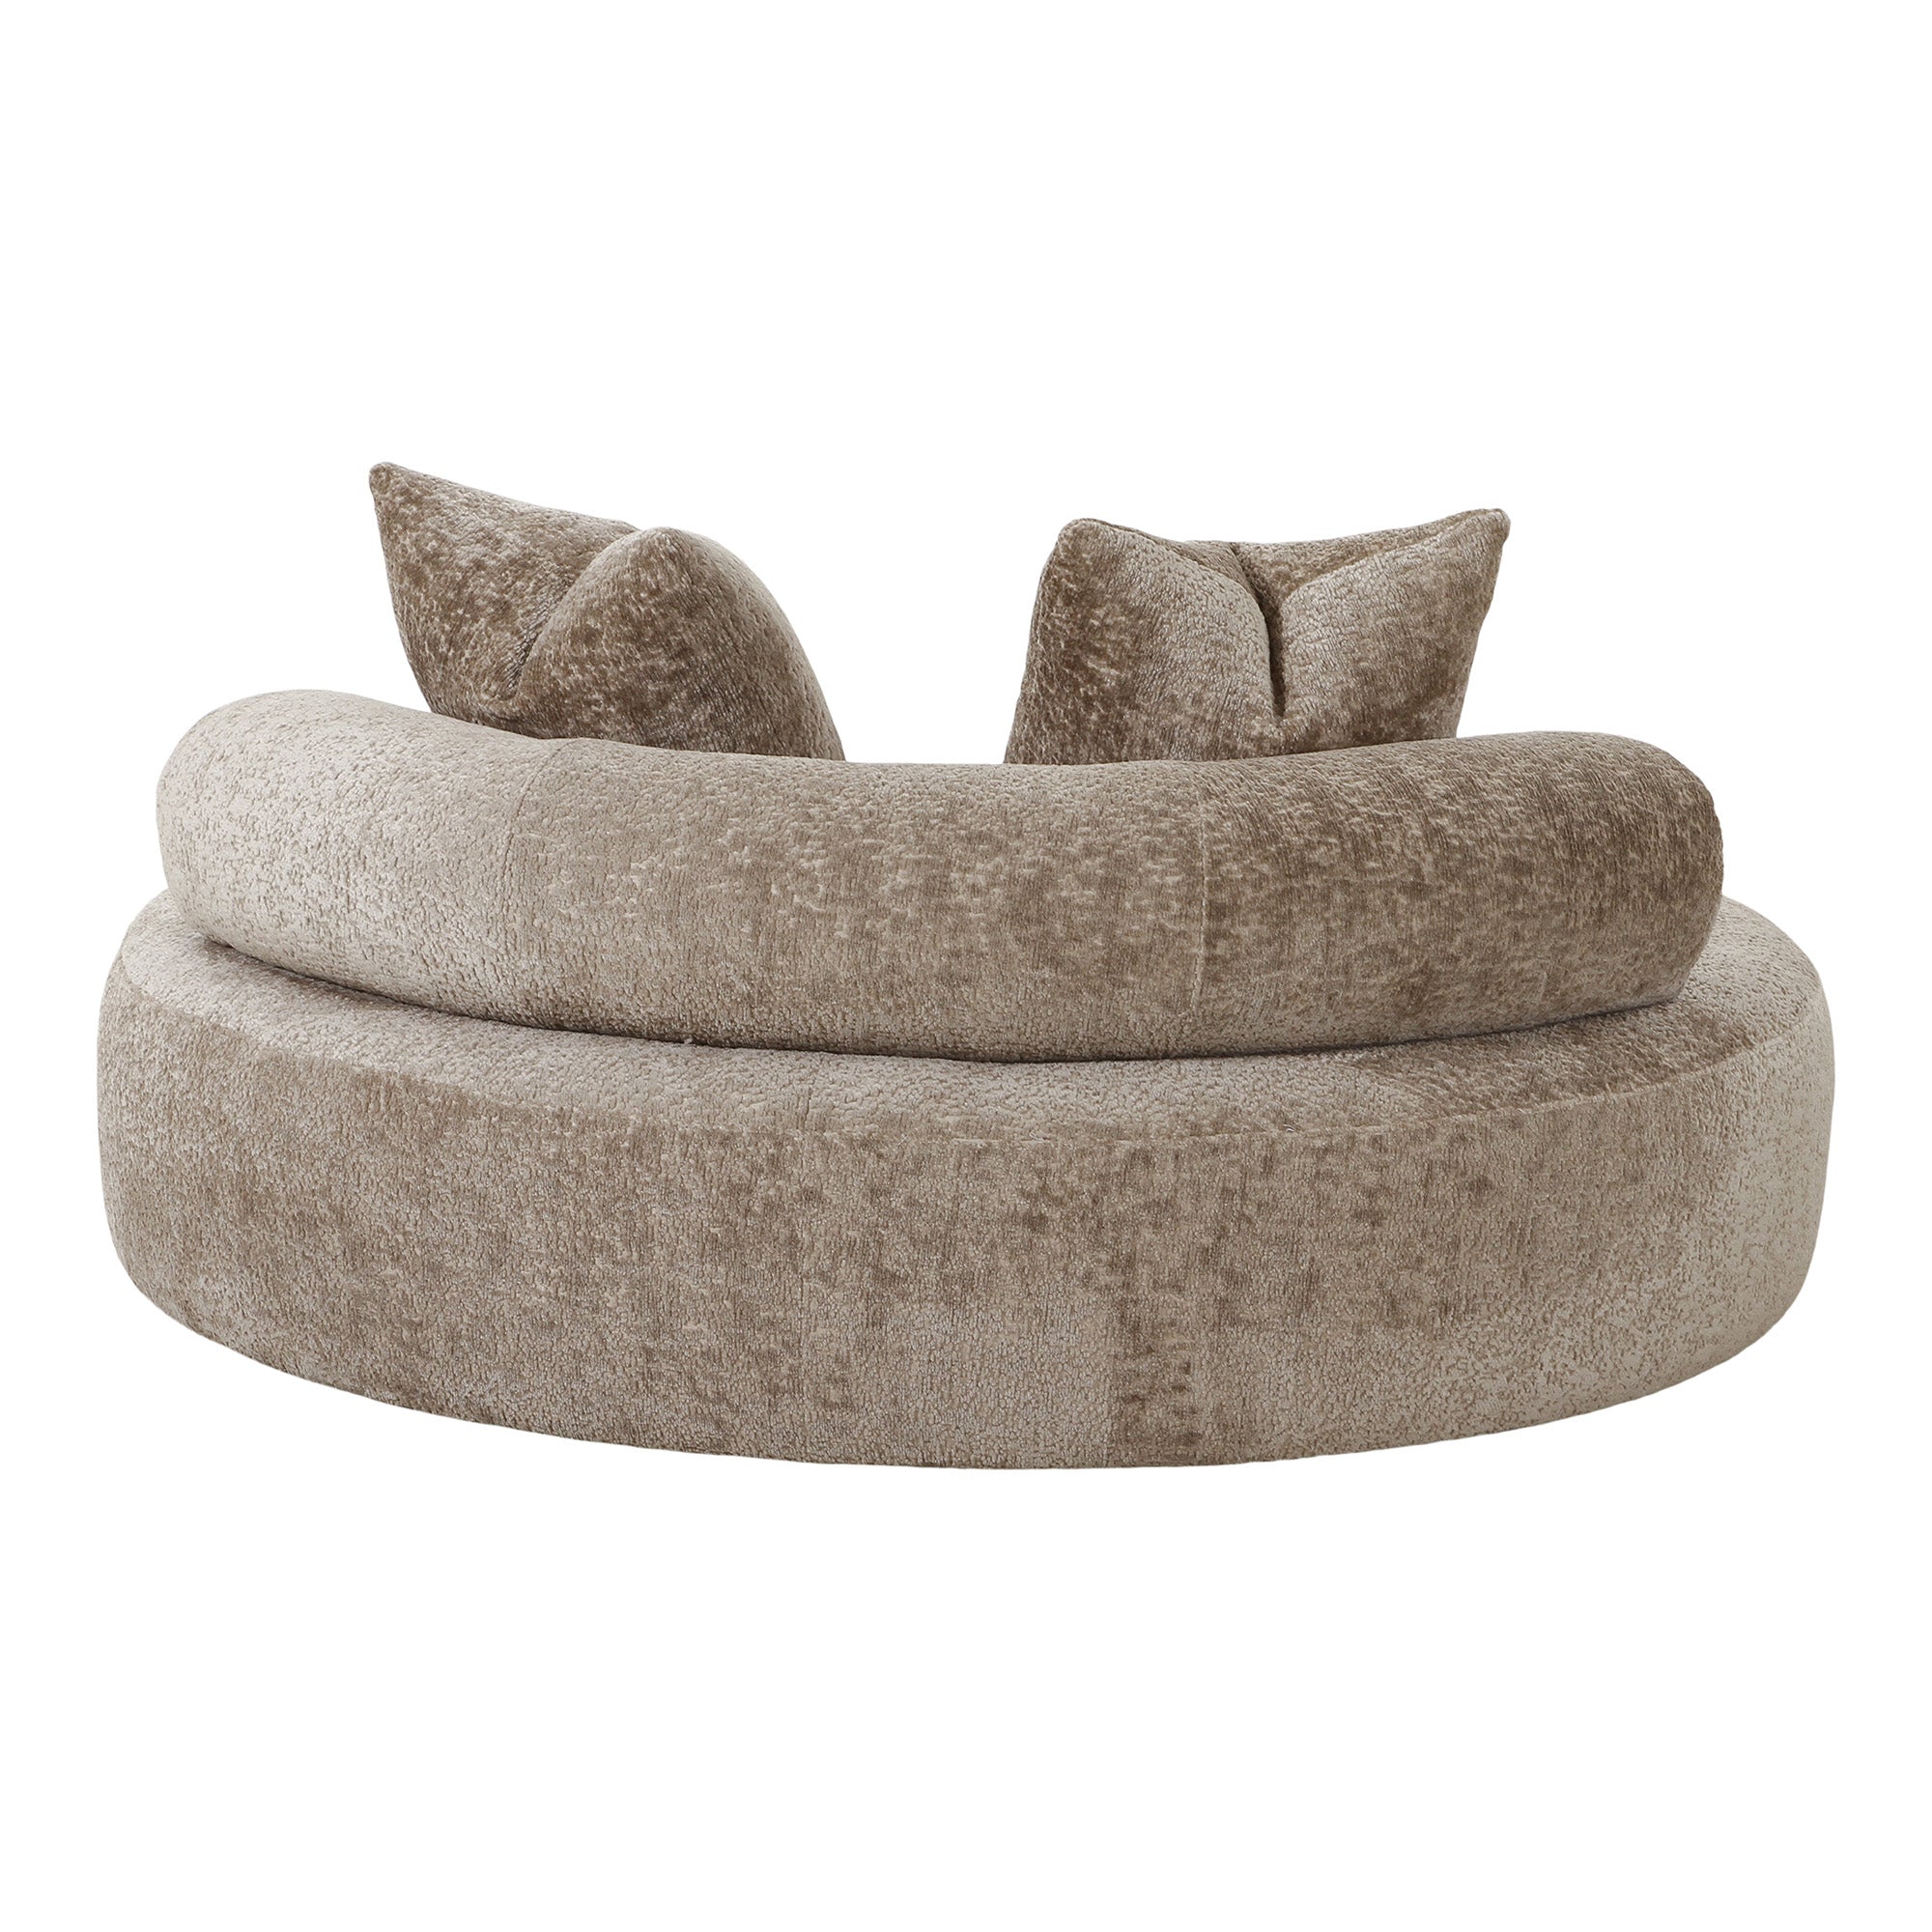 Cairo Daybed - Daybed Med 2 Puder I Chenille, Rund, Natur, Hn1251 ⎮ 5713917025664 ⎮ 5029050 